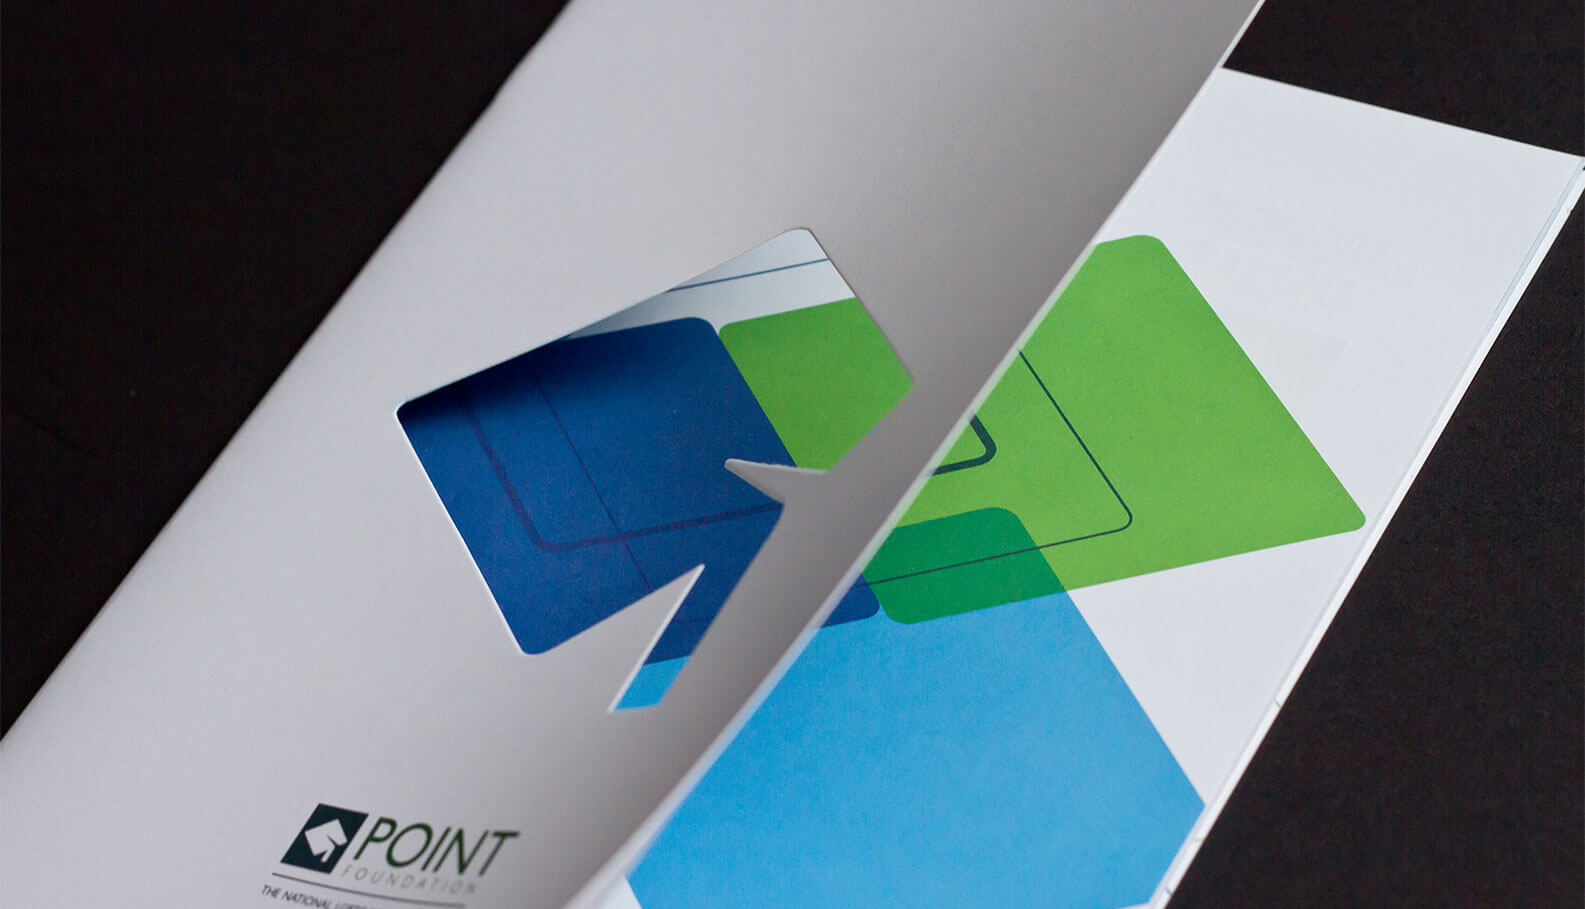 Point Foundation annual report layout design by Jacober Creative